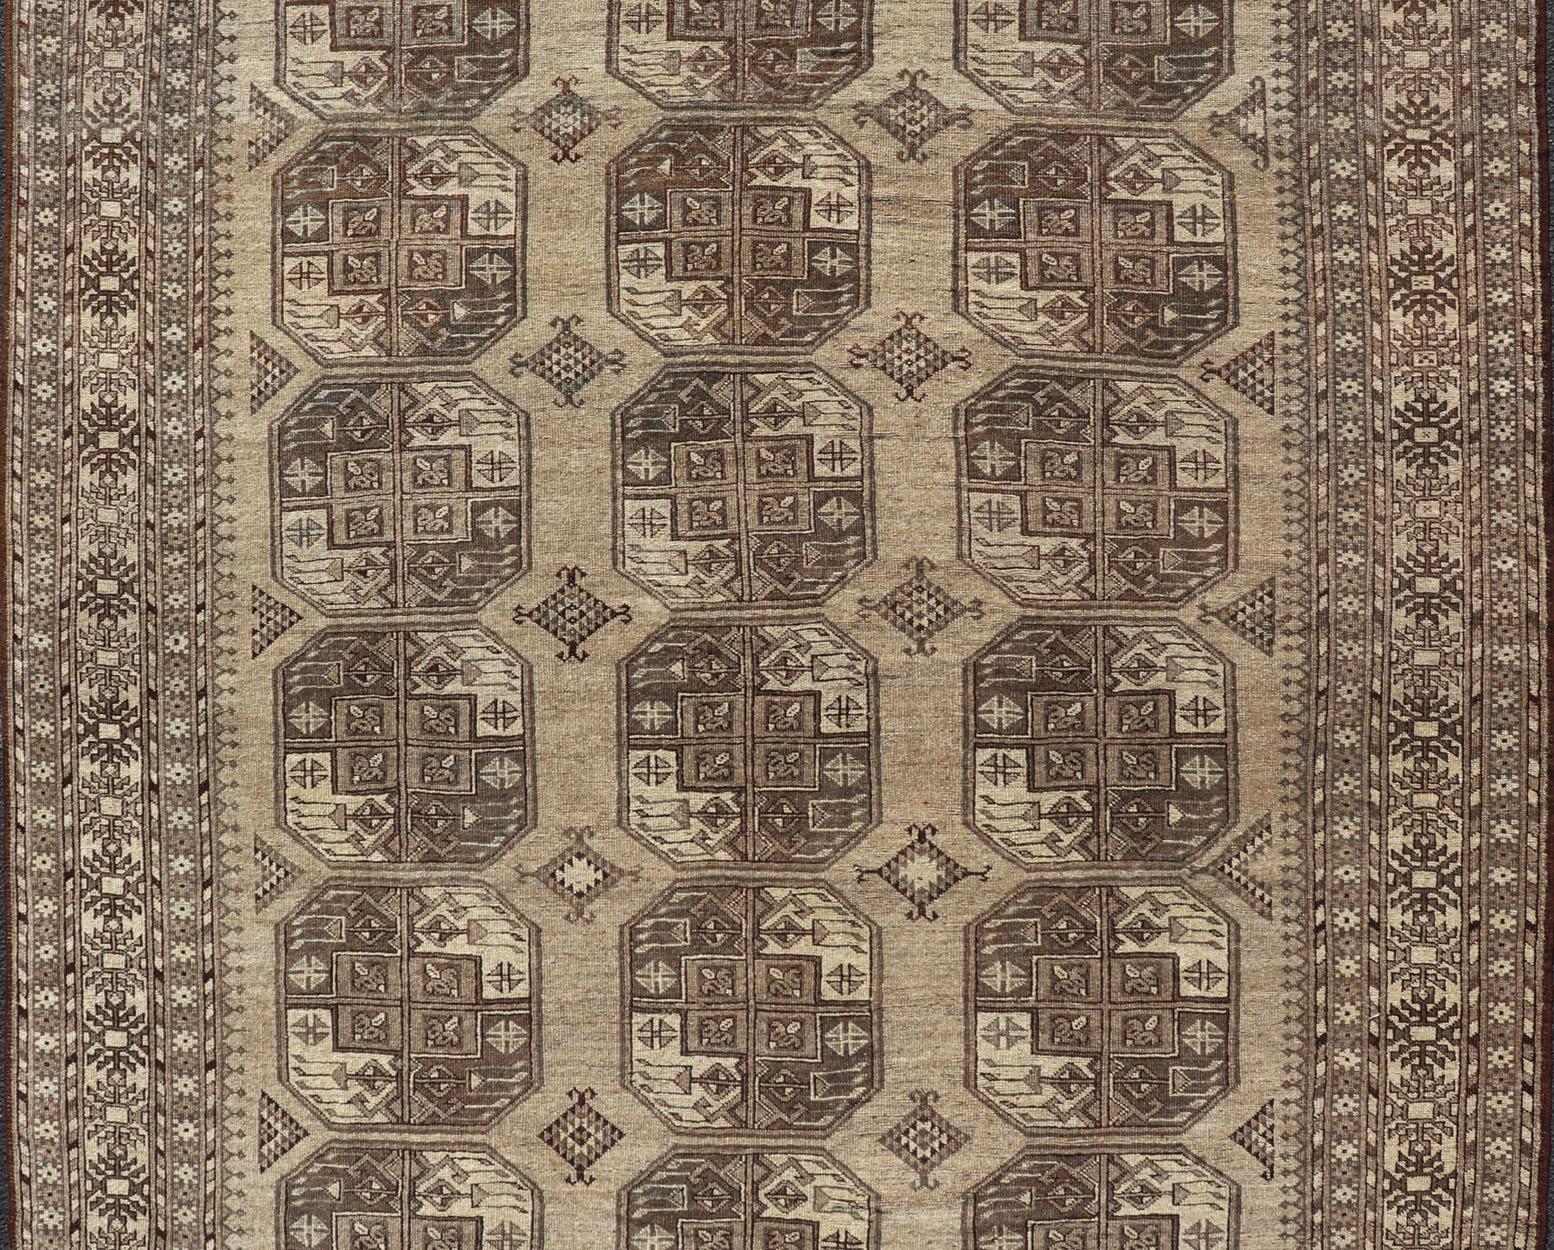 Hand-Knotted Turkomen Ersari Rug in Wool with All-Over Repeating Gul Design In Good Condition For Sale In Atlanta, GA